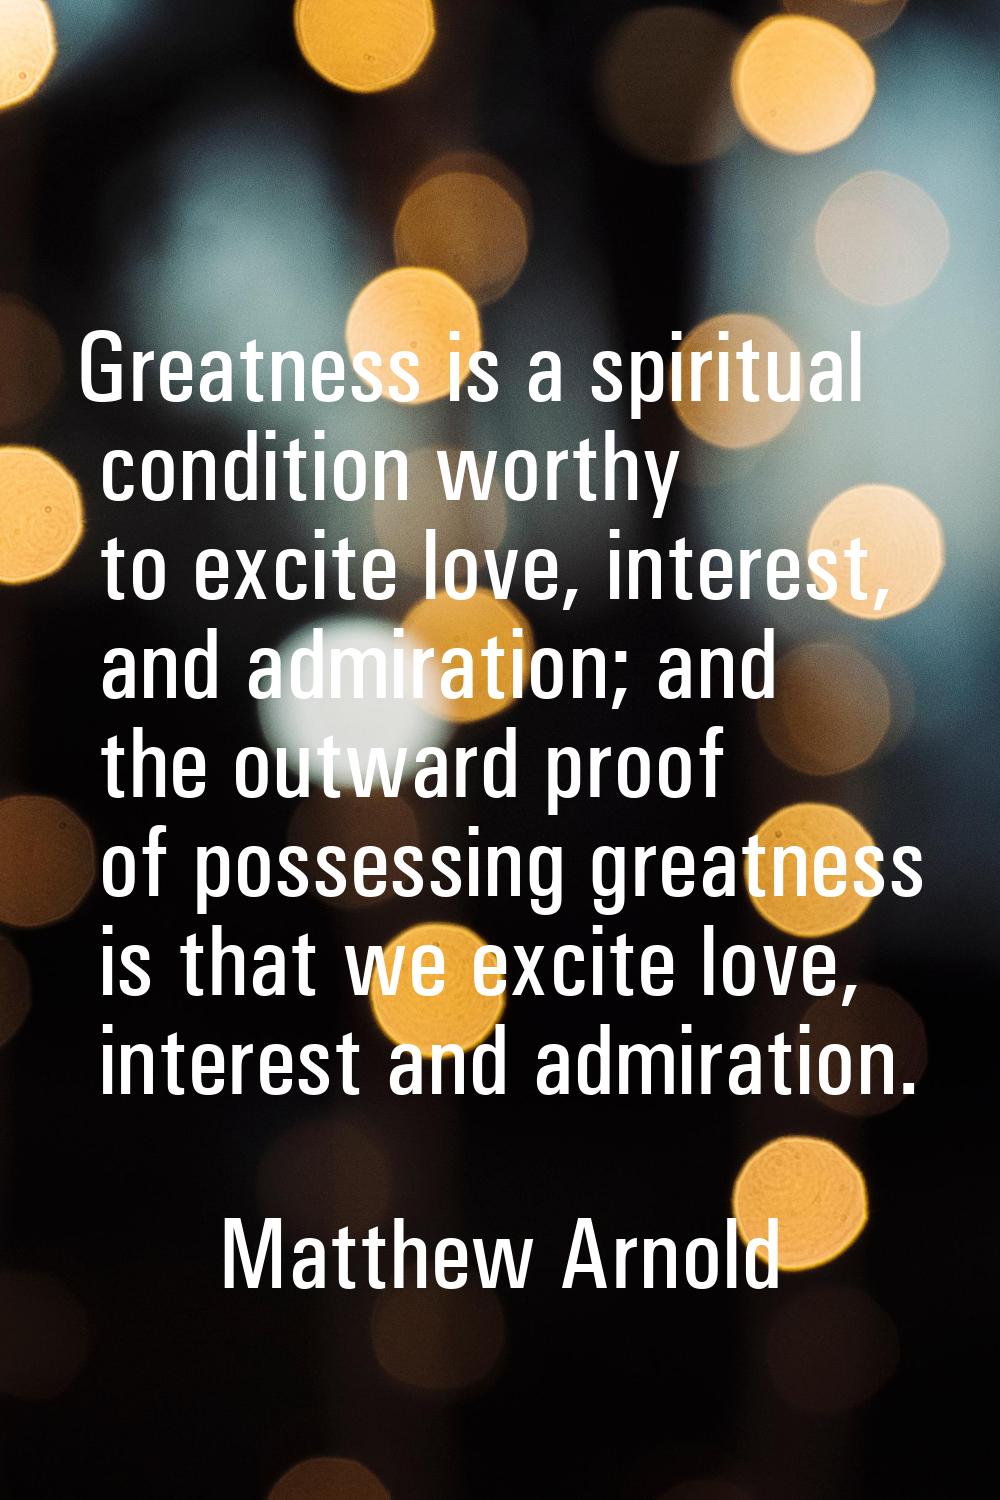 Greatness is a spiritual condition worthy to excite love, interest, and admiration; and the outward